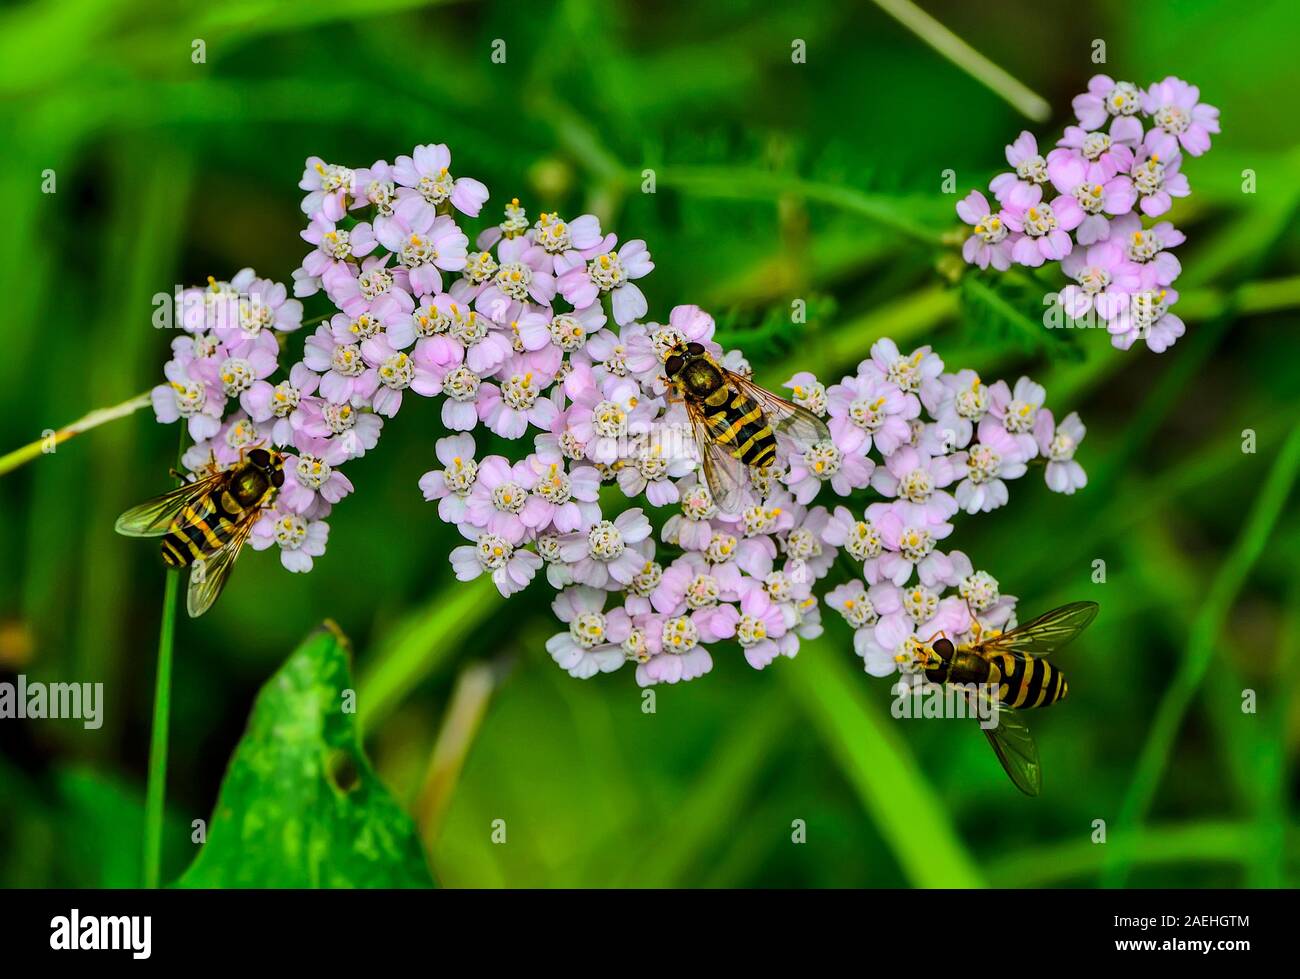 Three hoverflies or flower flies, or syrphid (Syrphidae) flies feeding nectar from blossoming pink yarrow flowers. Wasp-like flies with bright yellow- Stock Photo